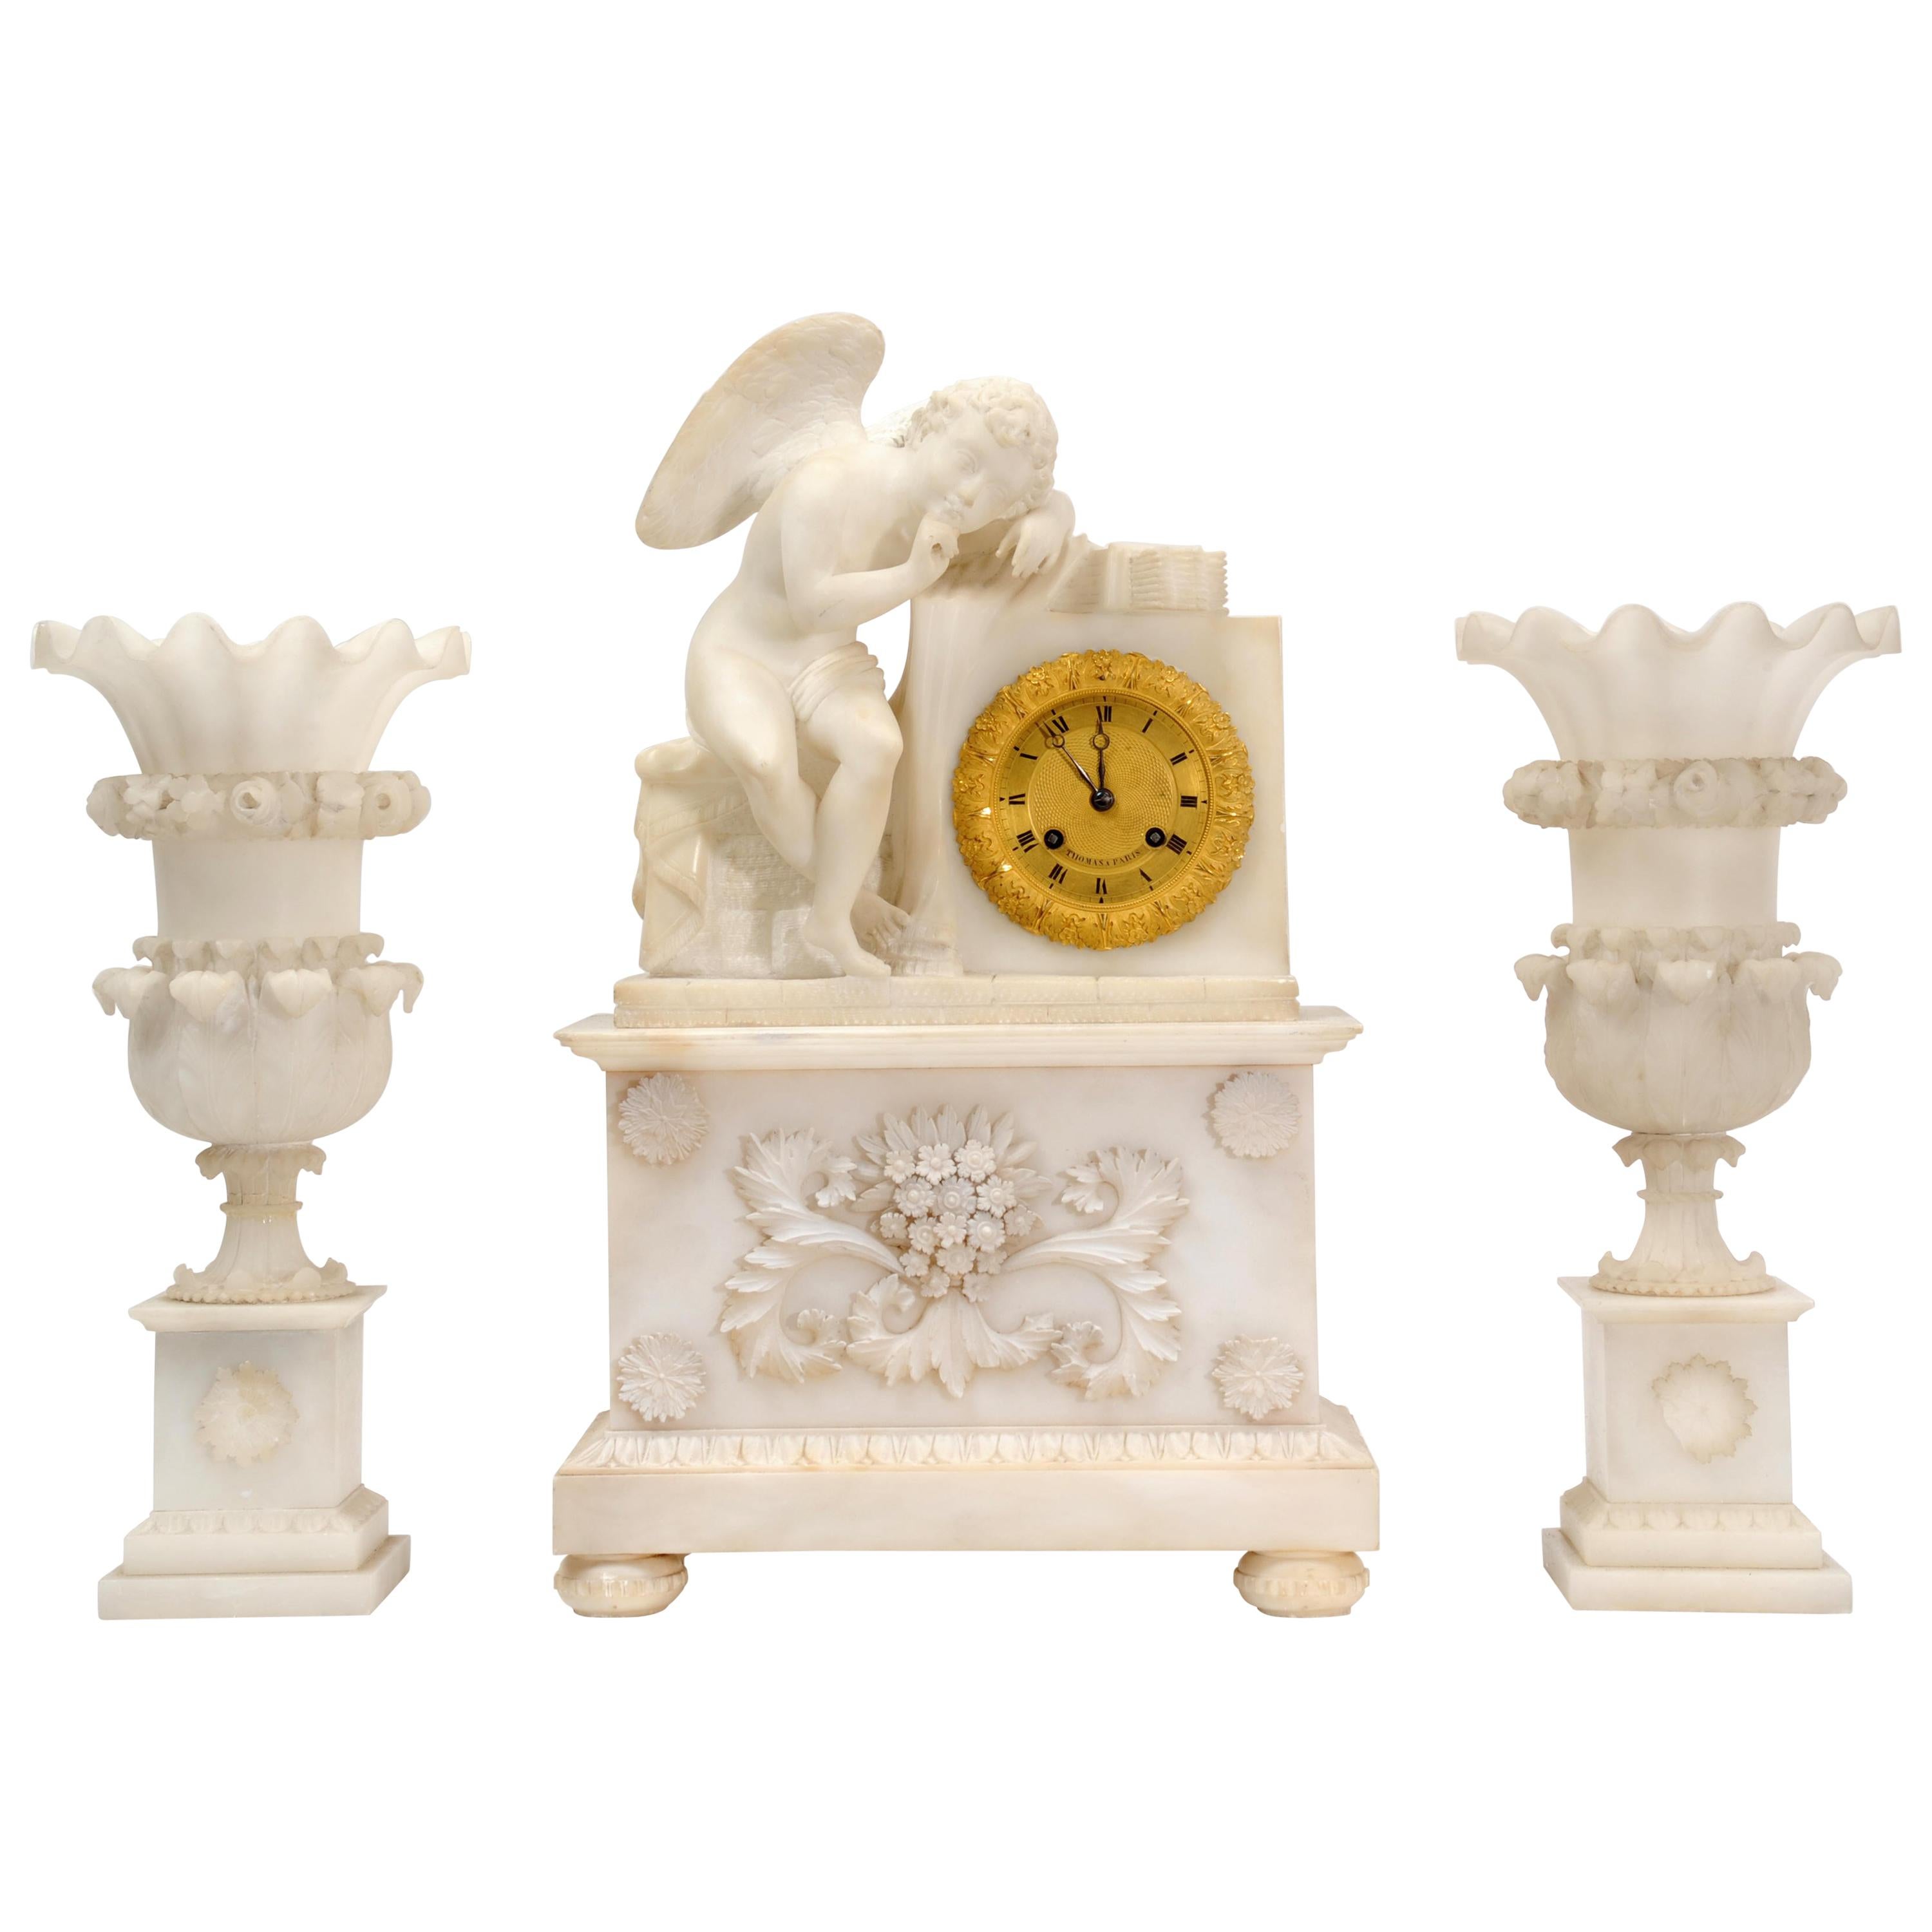 Early Antique French Alabaster Clock Set, Cupid L’Amour Menaçant after Falconet